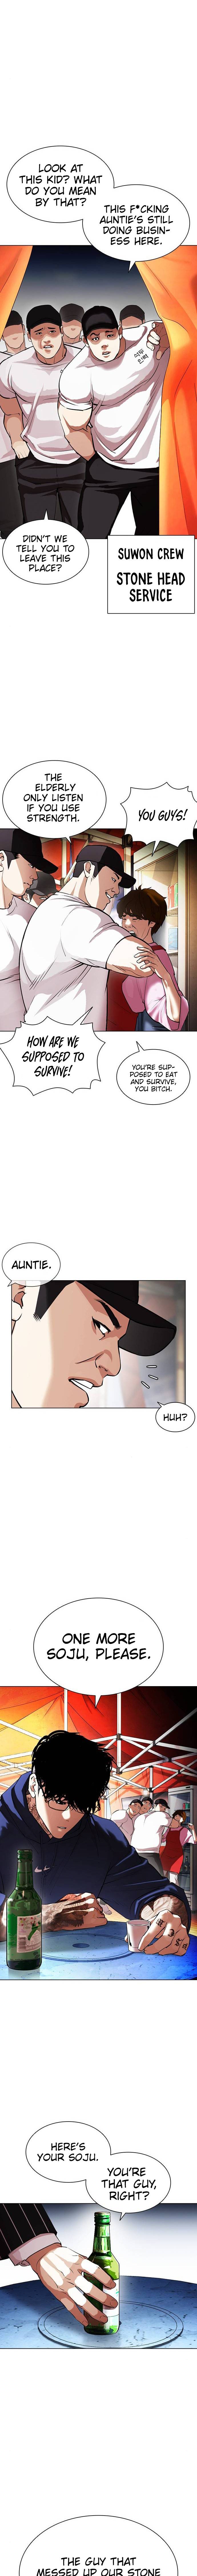 Lookism Chapter 407 image 05